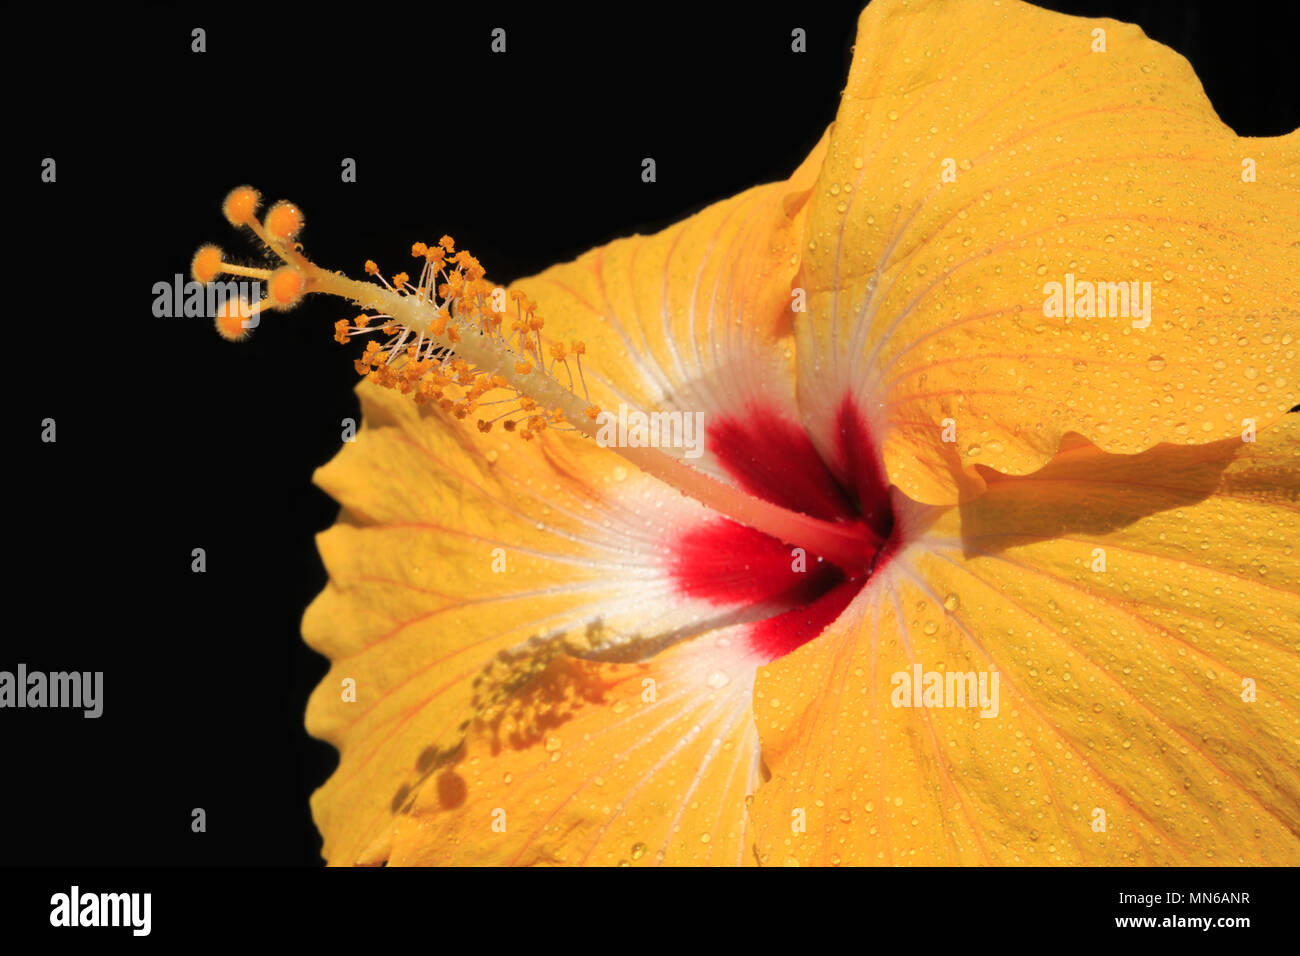 Brilliant color tropical yellow hibiscus flower, Hibiscus Rosa-sinensis, full bloom close up with stigma full of pollen against black background Stock Photo